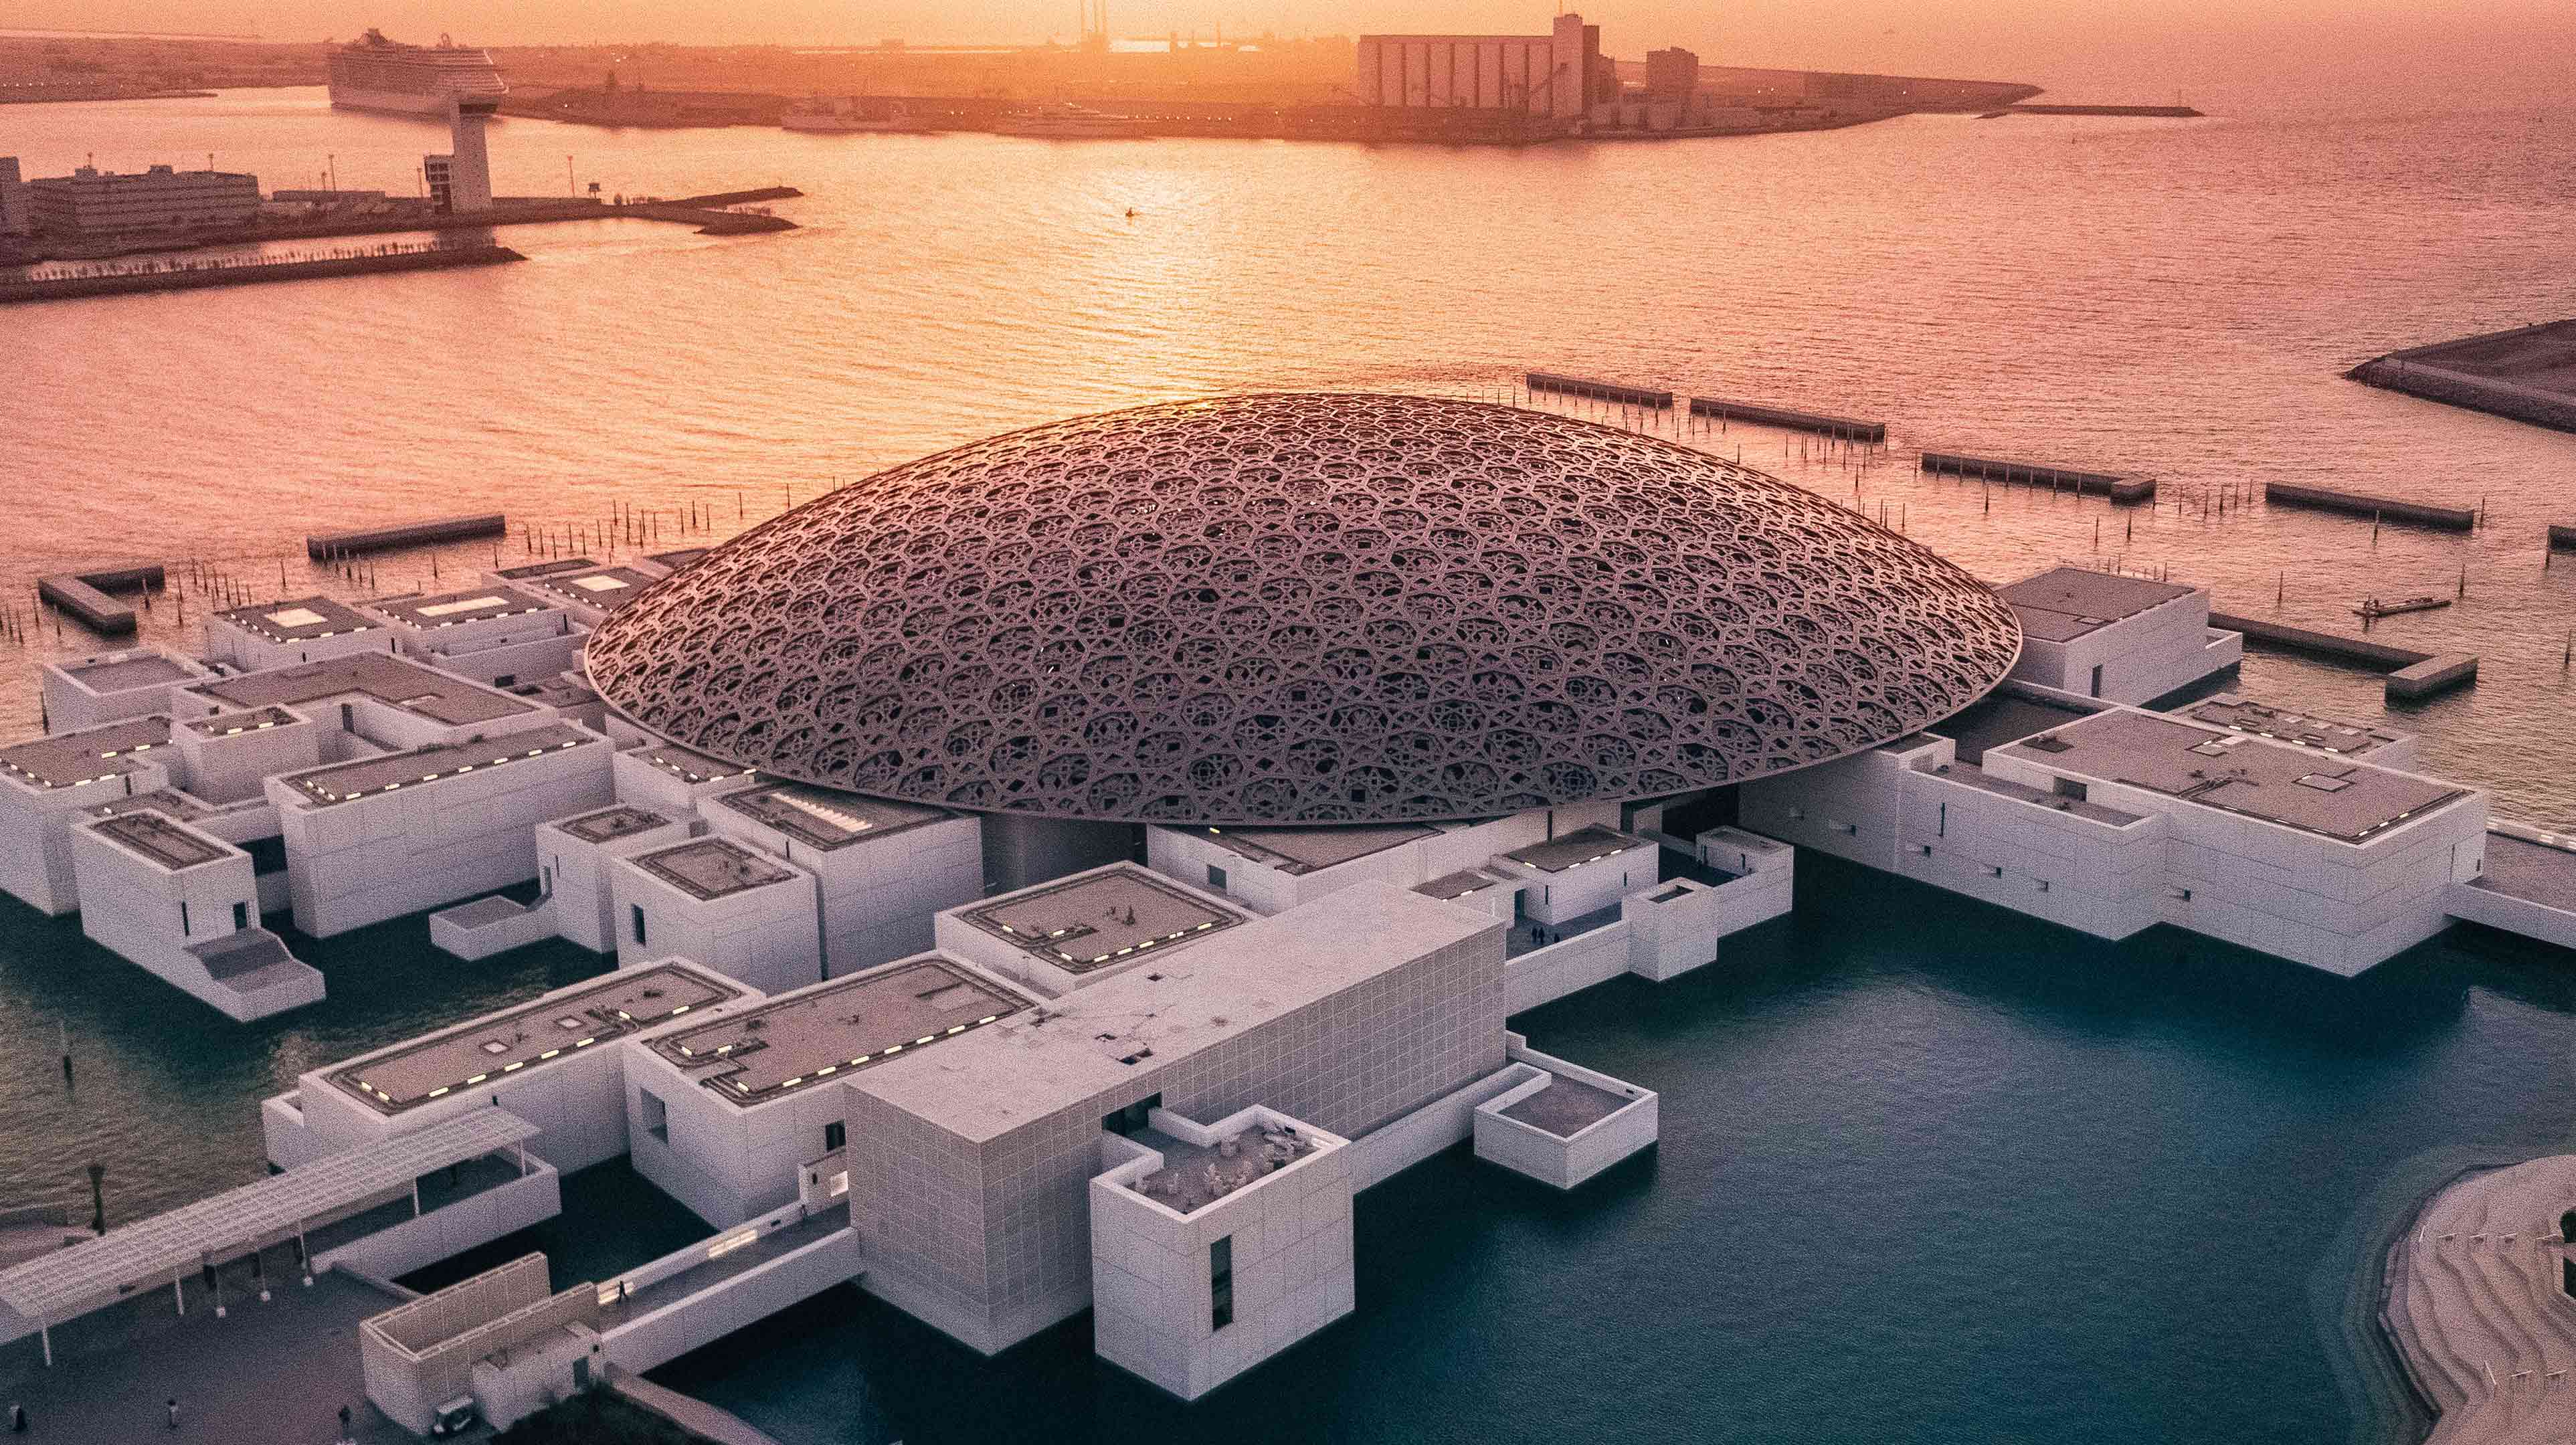 Discover the magnificent Louvre Museum in Abu Dhabi